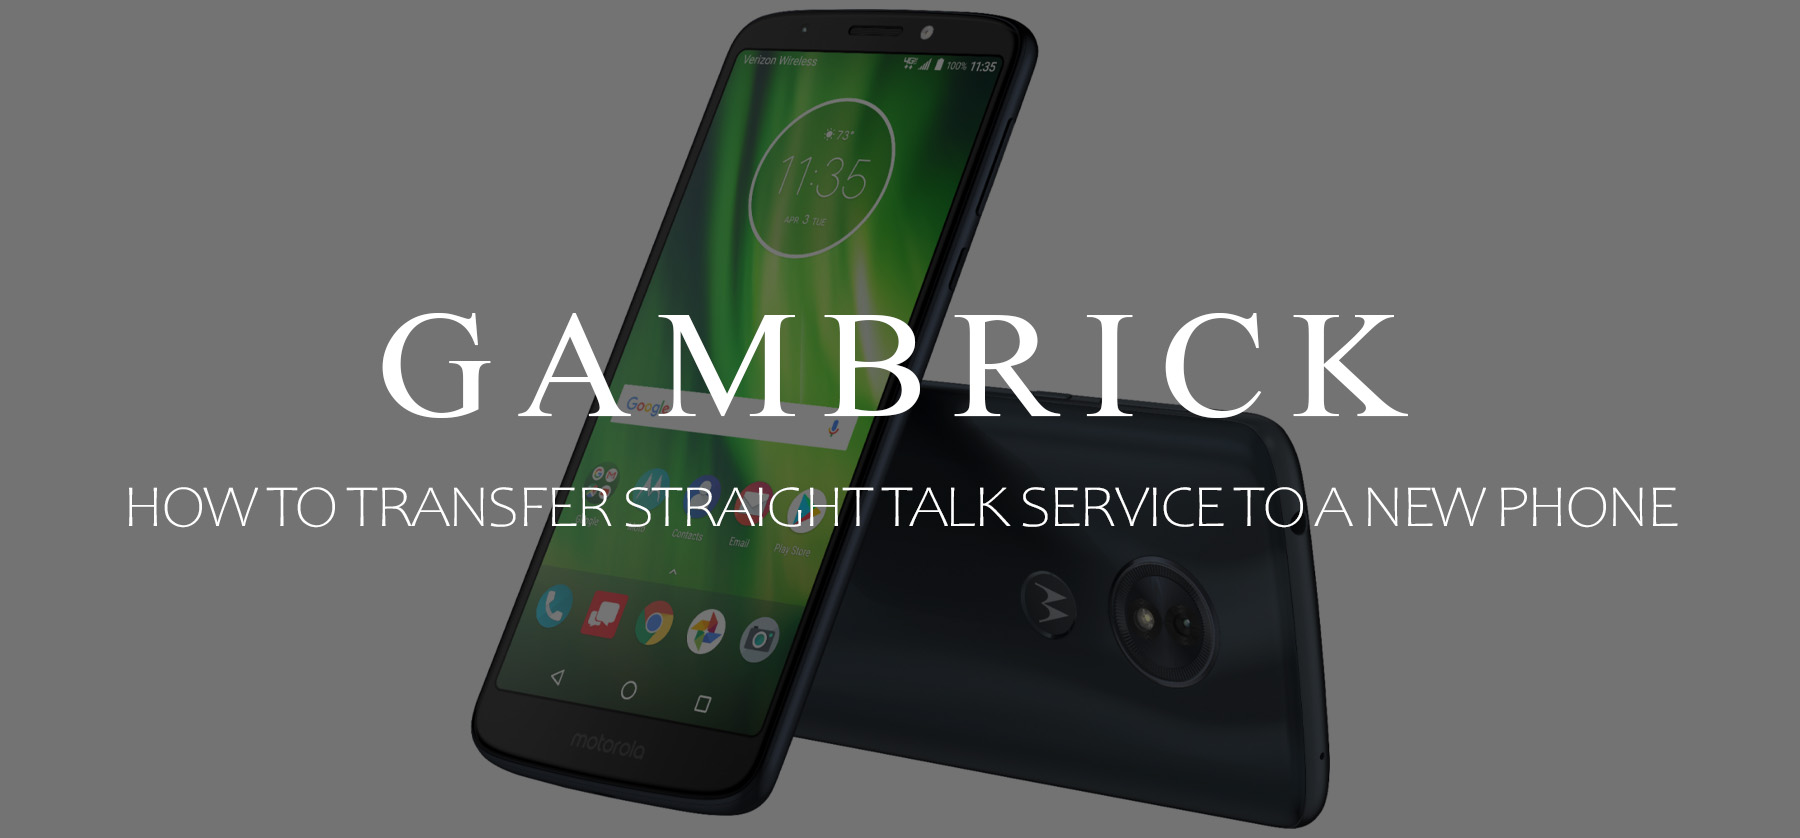 how to transfer straight talk service to a new phone banner 1.0